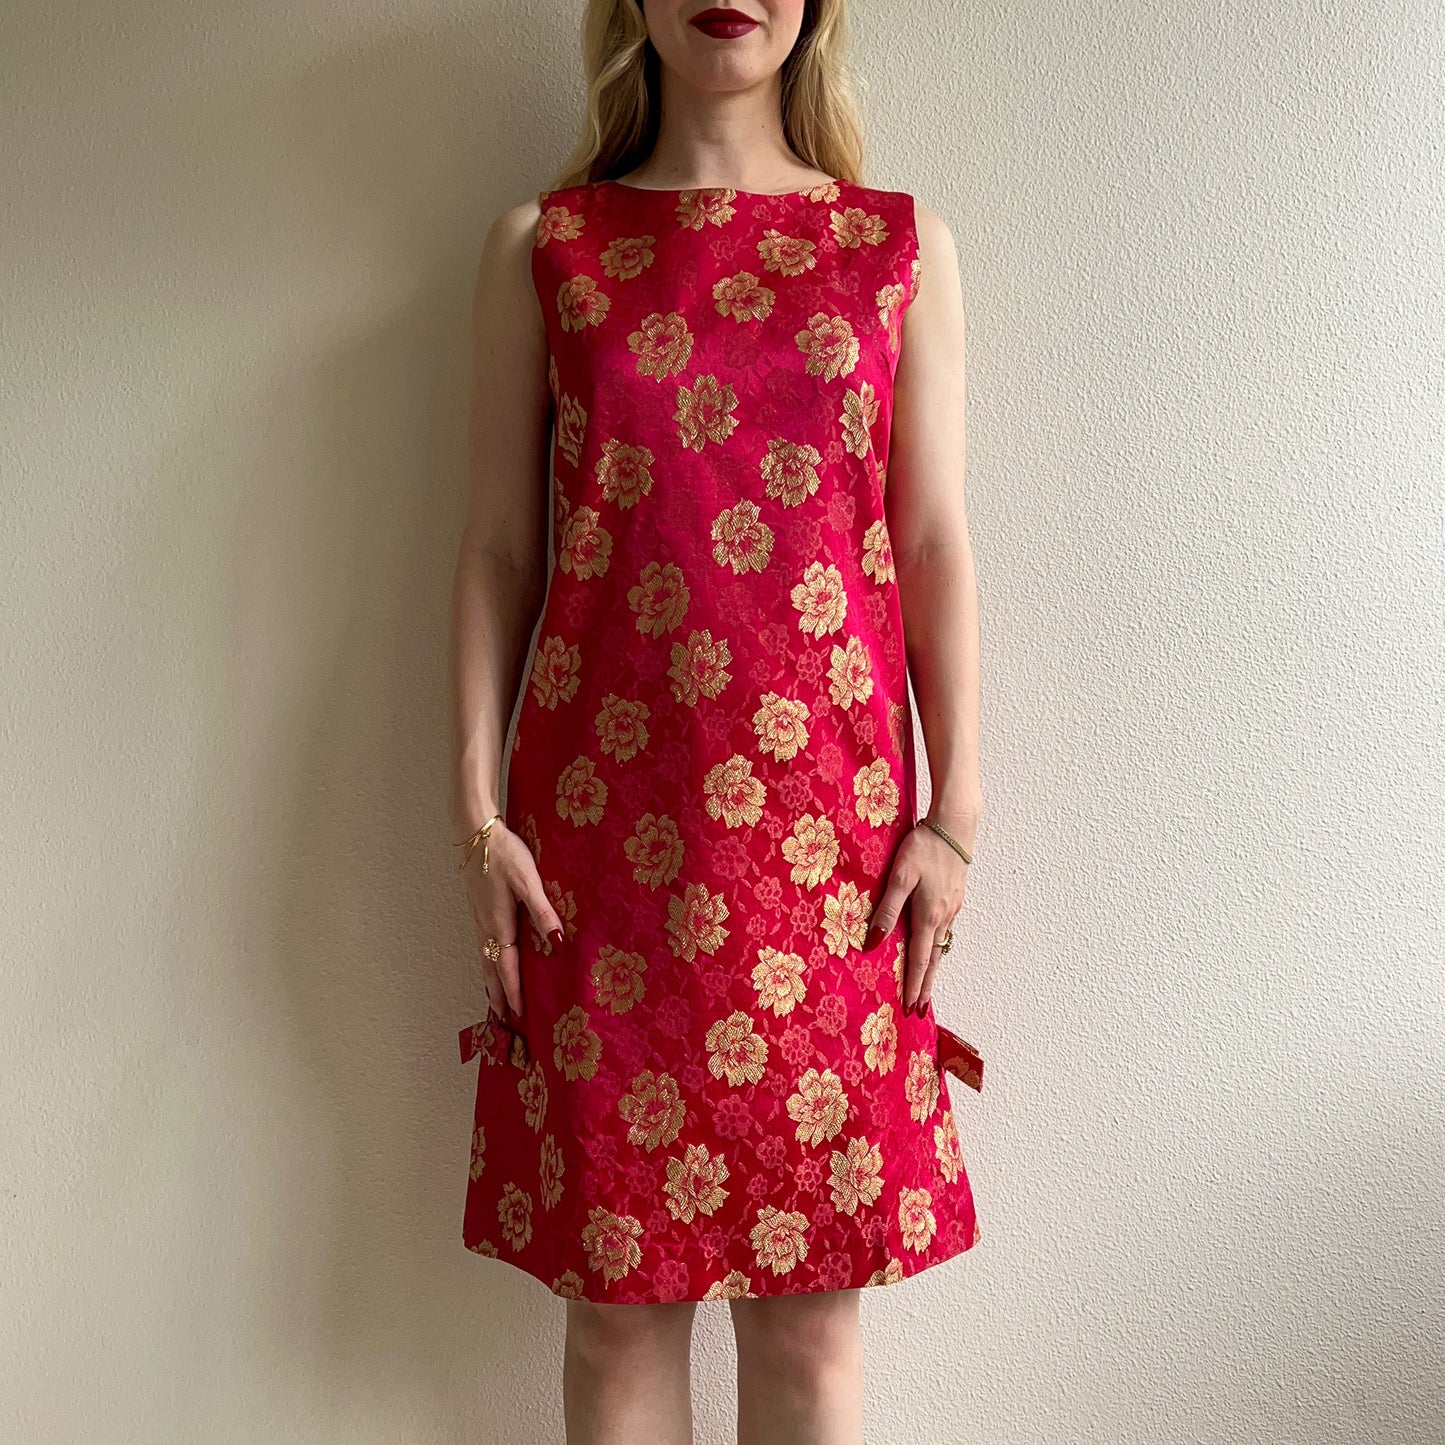 Exquisite 1960s Red and Gold Florals Shift Dress (S/M)